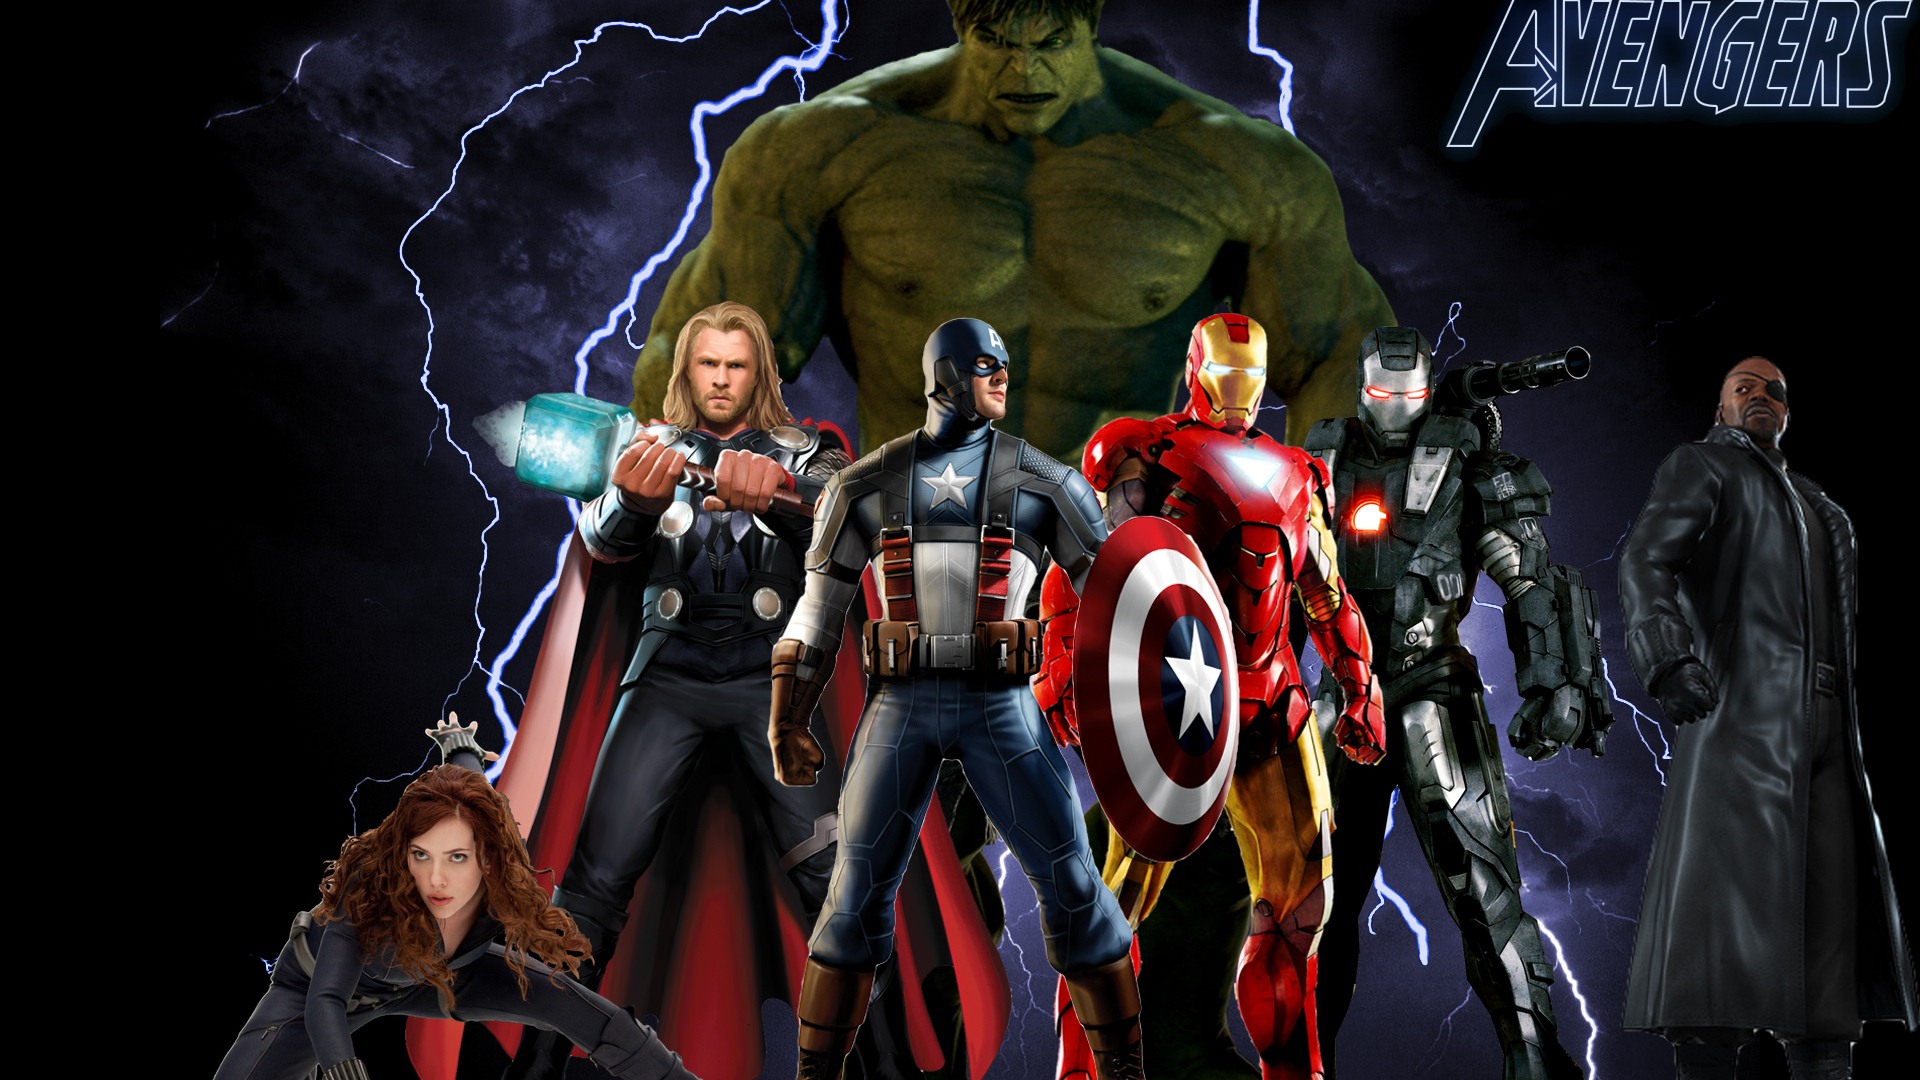 The Avengers 2012 HD wallpapers #5 - 1920x1080